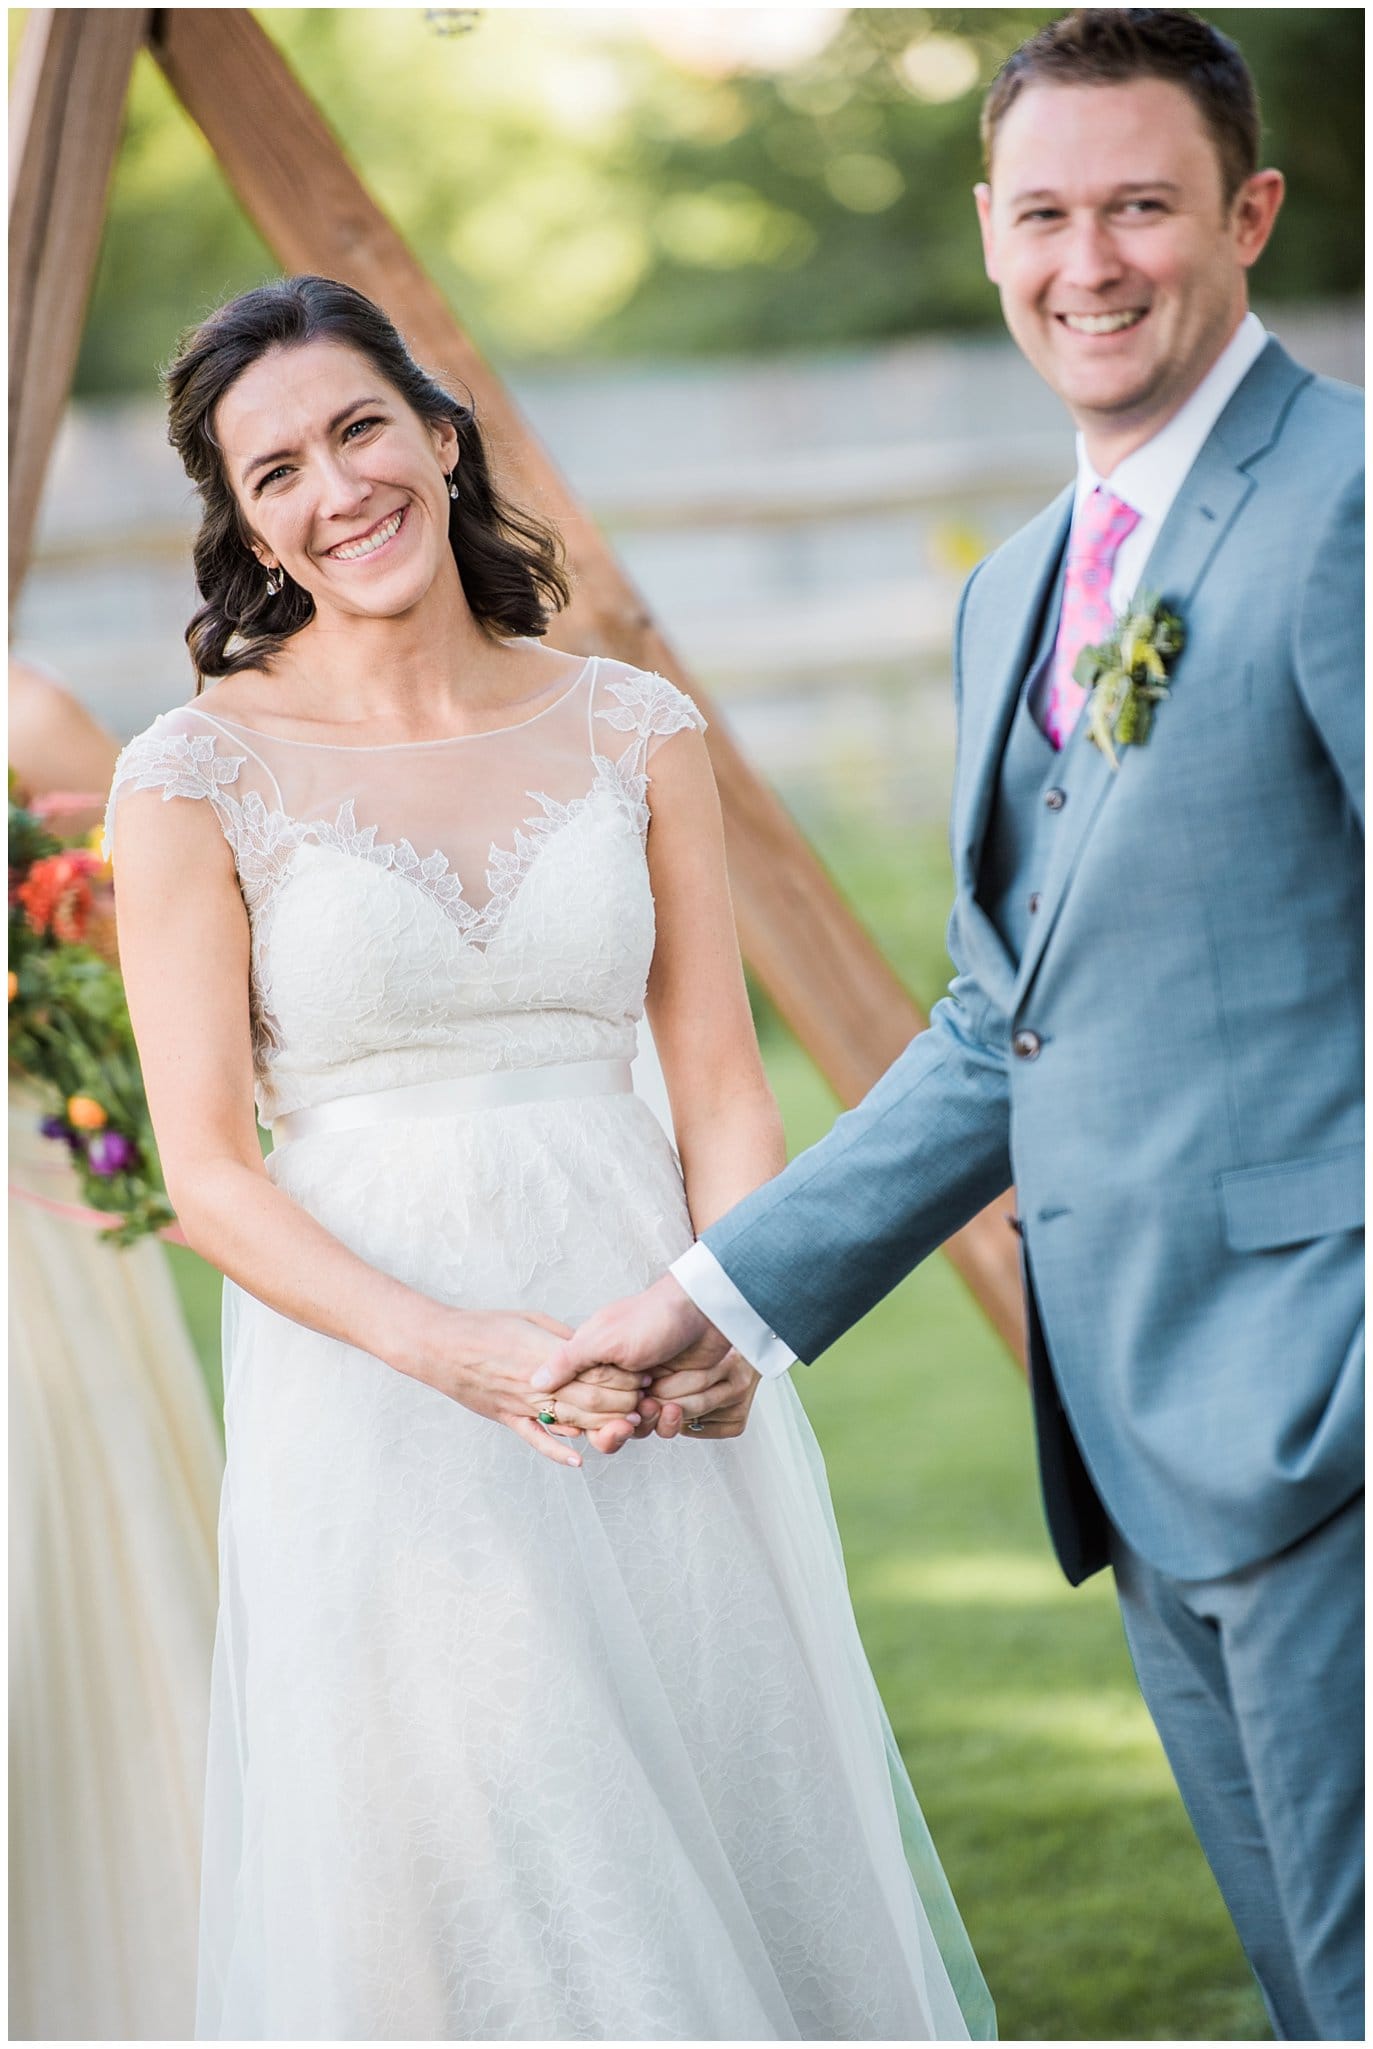 Bride and groom smiling during ceremony at Lyons Farmette wedding by Loveland Wedding Photographer Jennie Crate